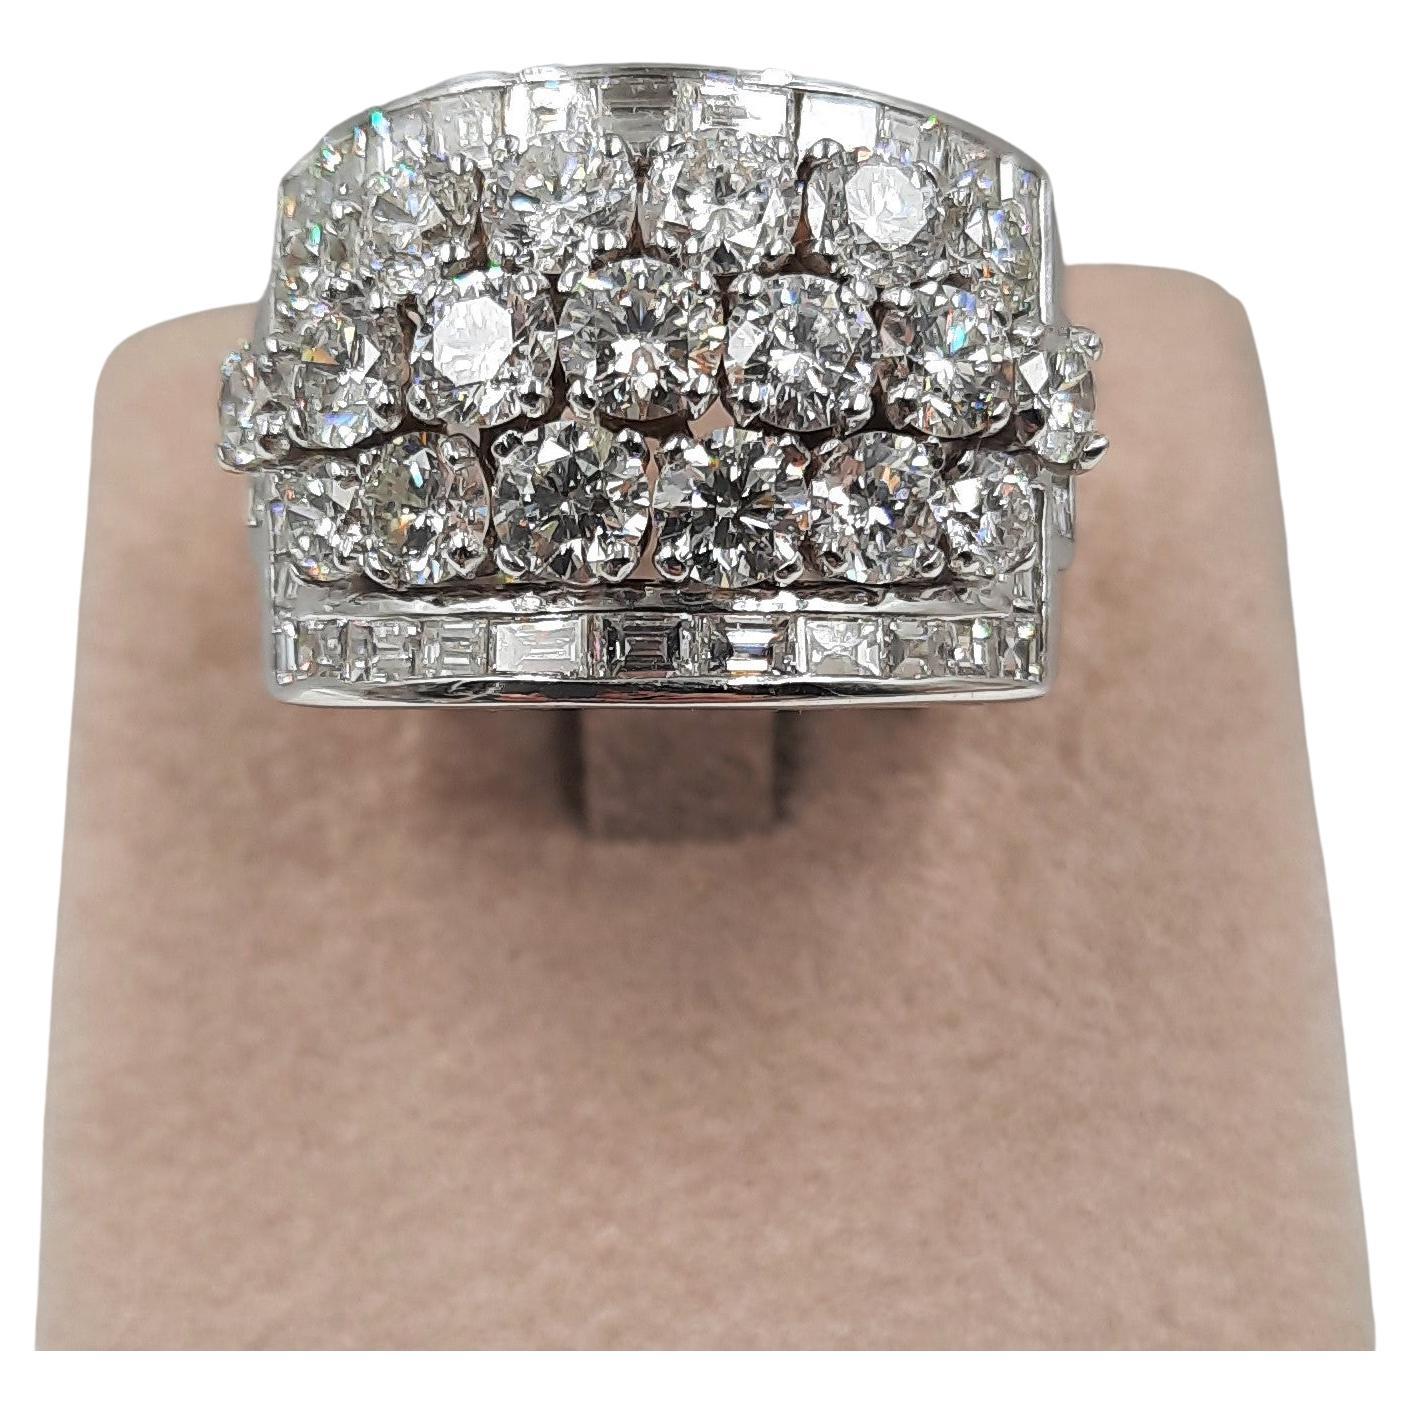 Exceptional white Brilliant cut diamond (3.6 carats), white baguette diamond (1.31 carats)  and 18 carats white gold (17.8 grams) band ring.
Eventually in set with earrings (see photo).